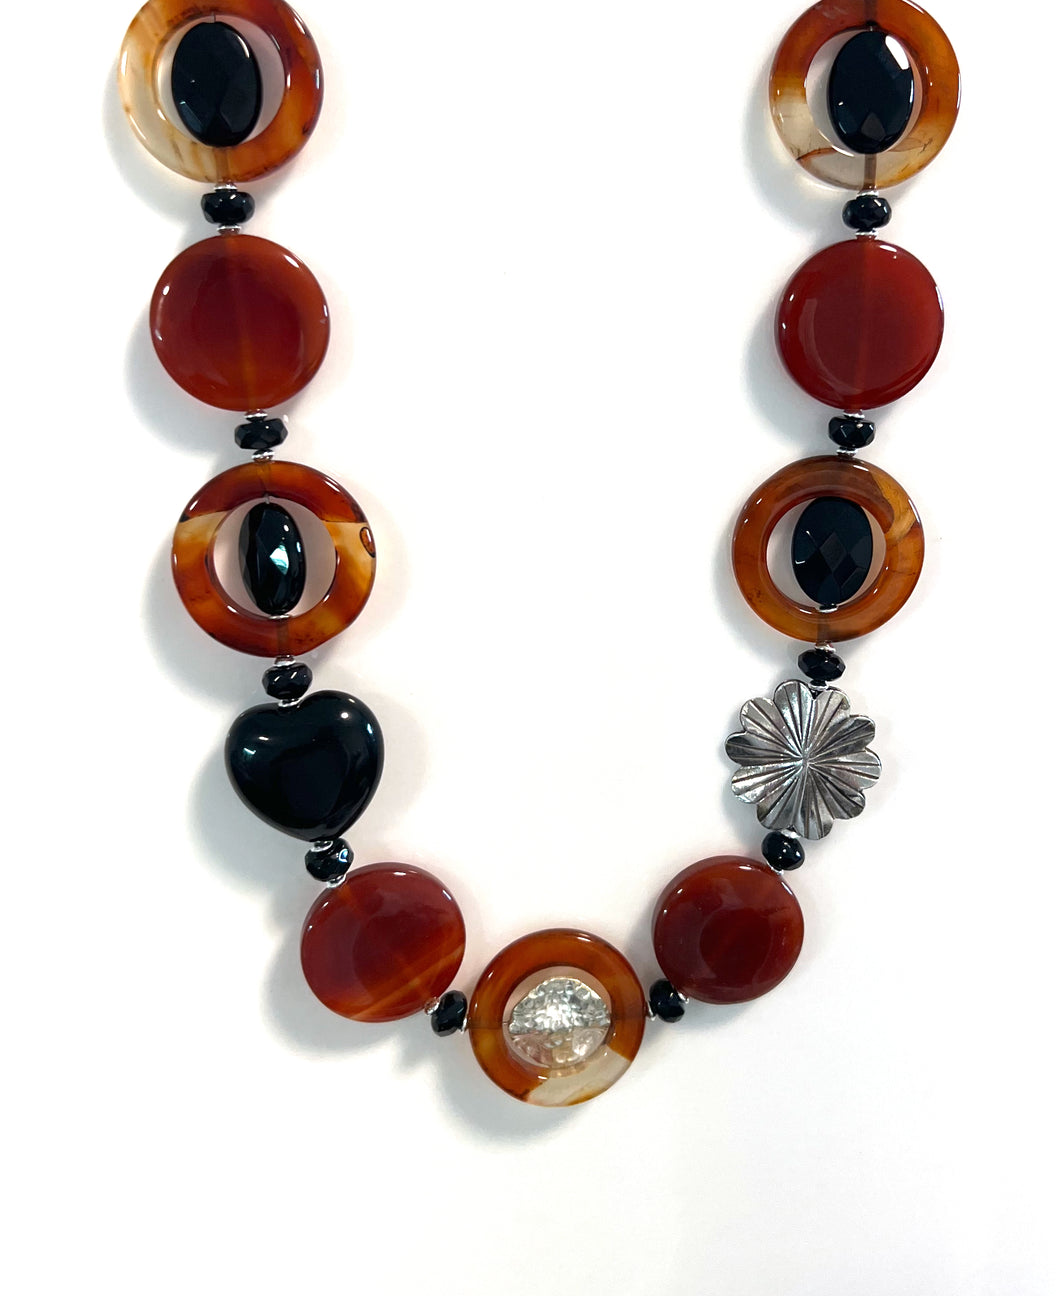 Australian Handmade Orange Necklace with Agate Onyx and Sterling Silver